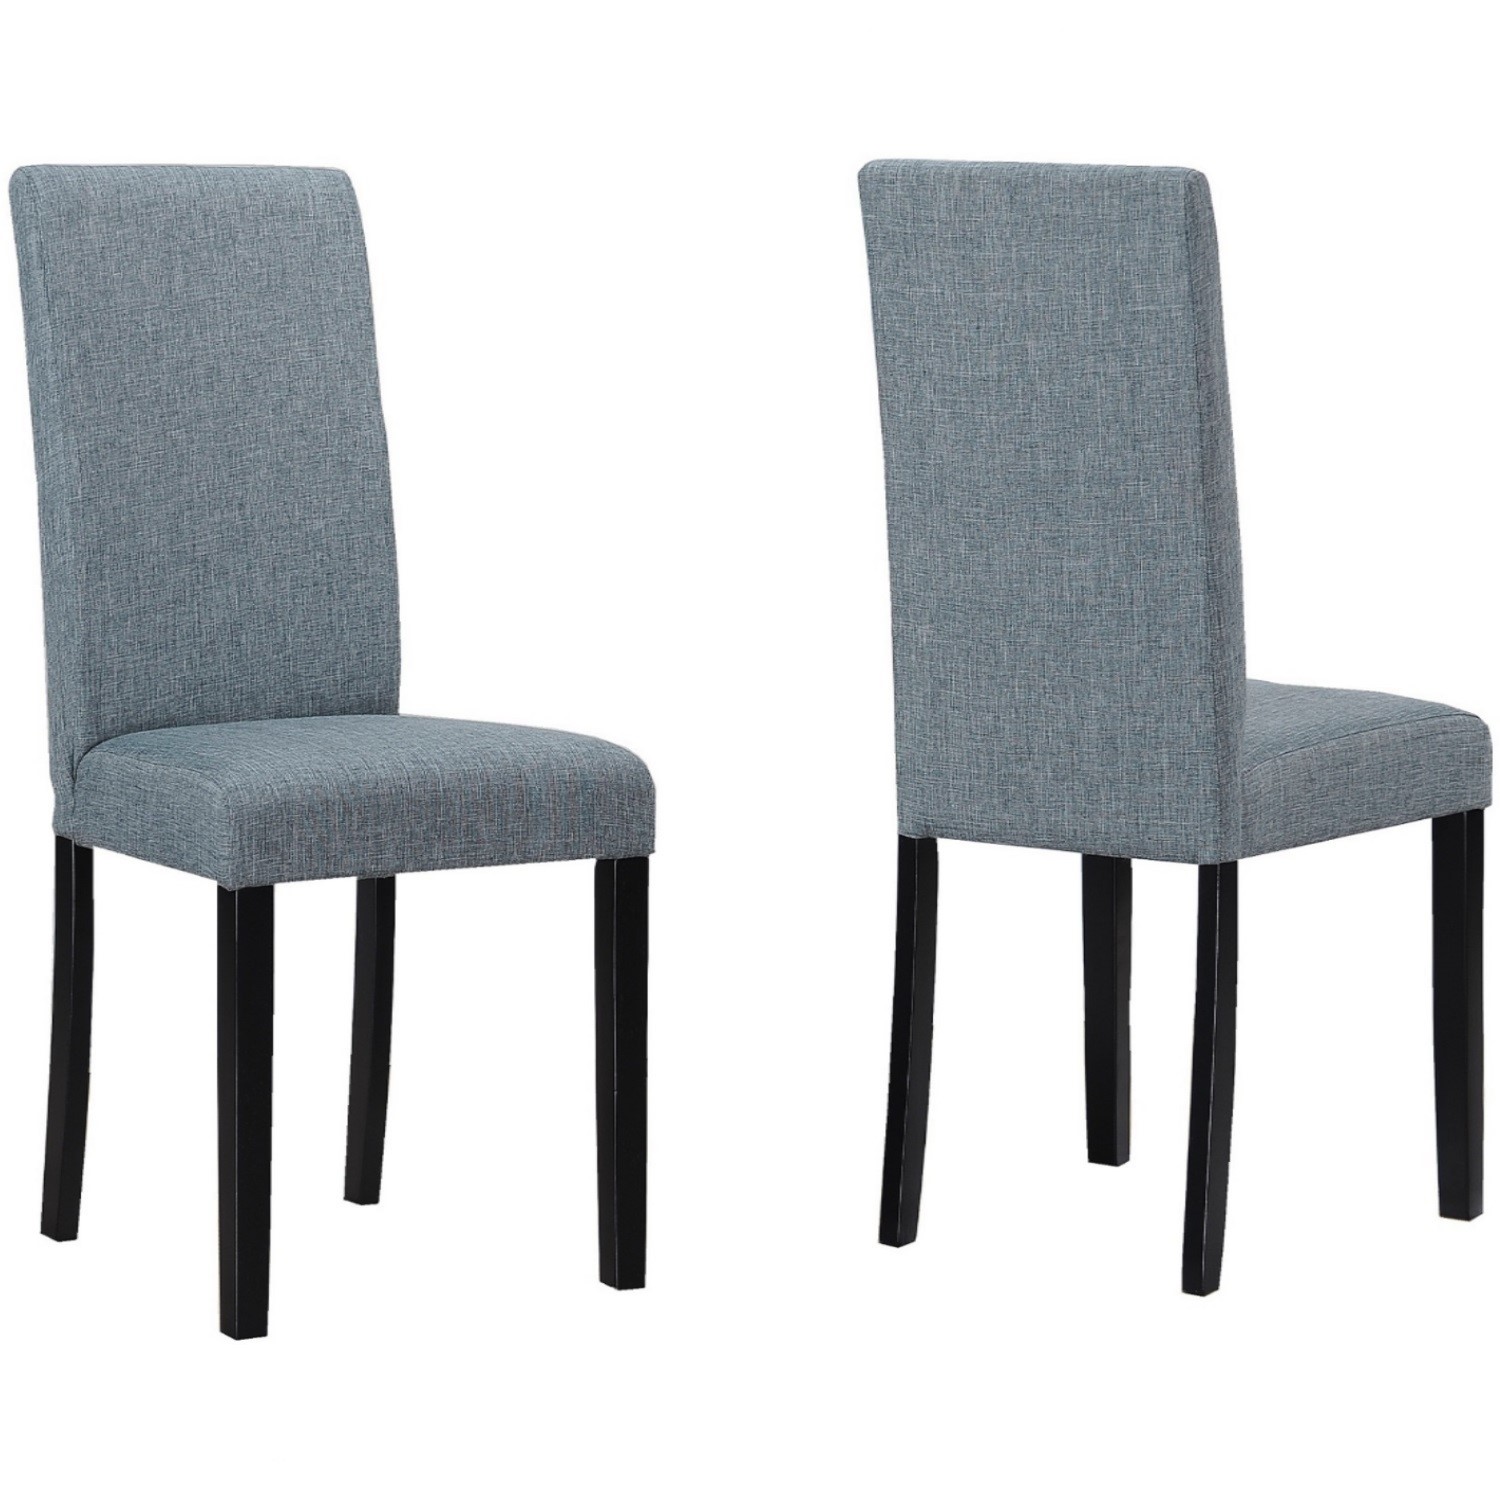 Set Of 2 Slate Grey Dining Chairs With, Gray Upholstered Dining Chairs With Black Legs